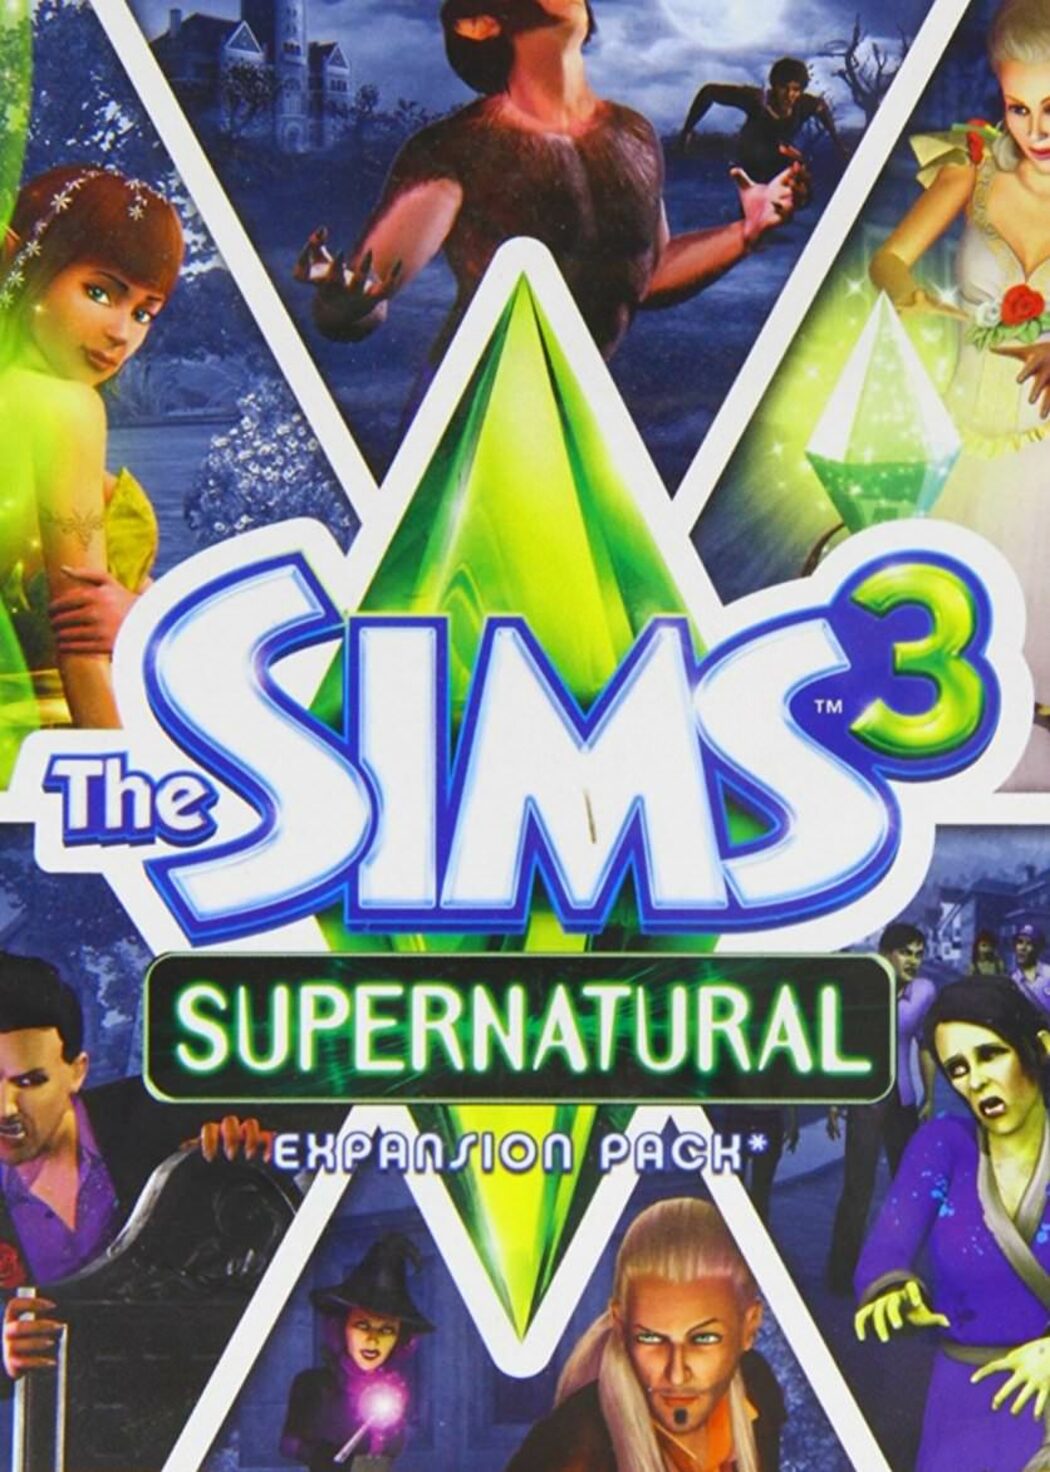 The sims 3 psp download